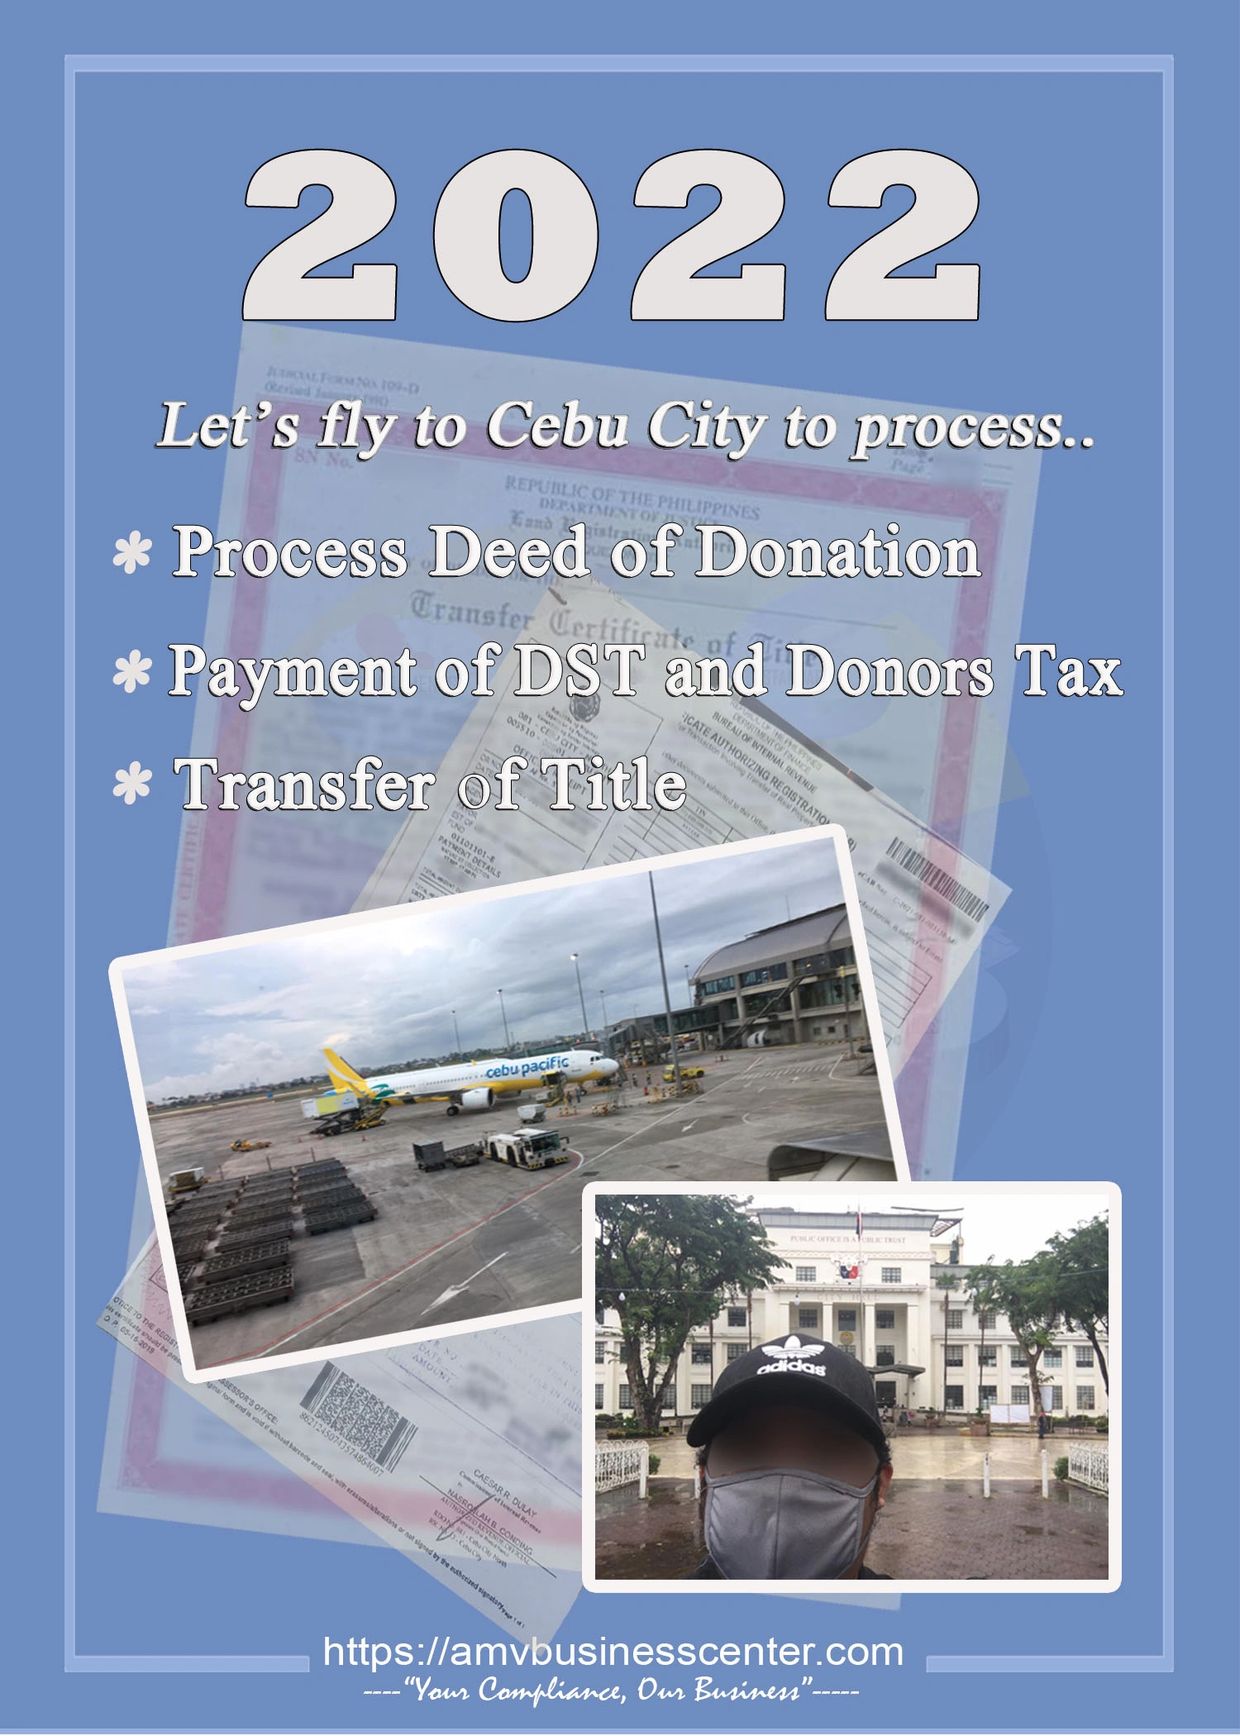 Deed of Donation Process, Payment of DST and Donors Tax, Transfer of Title, 